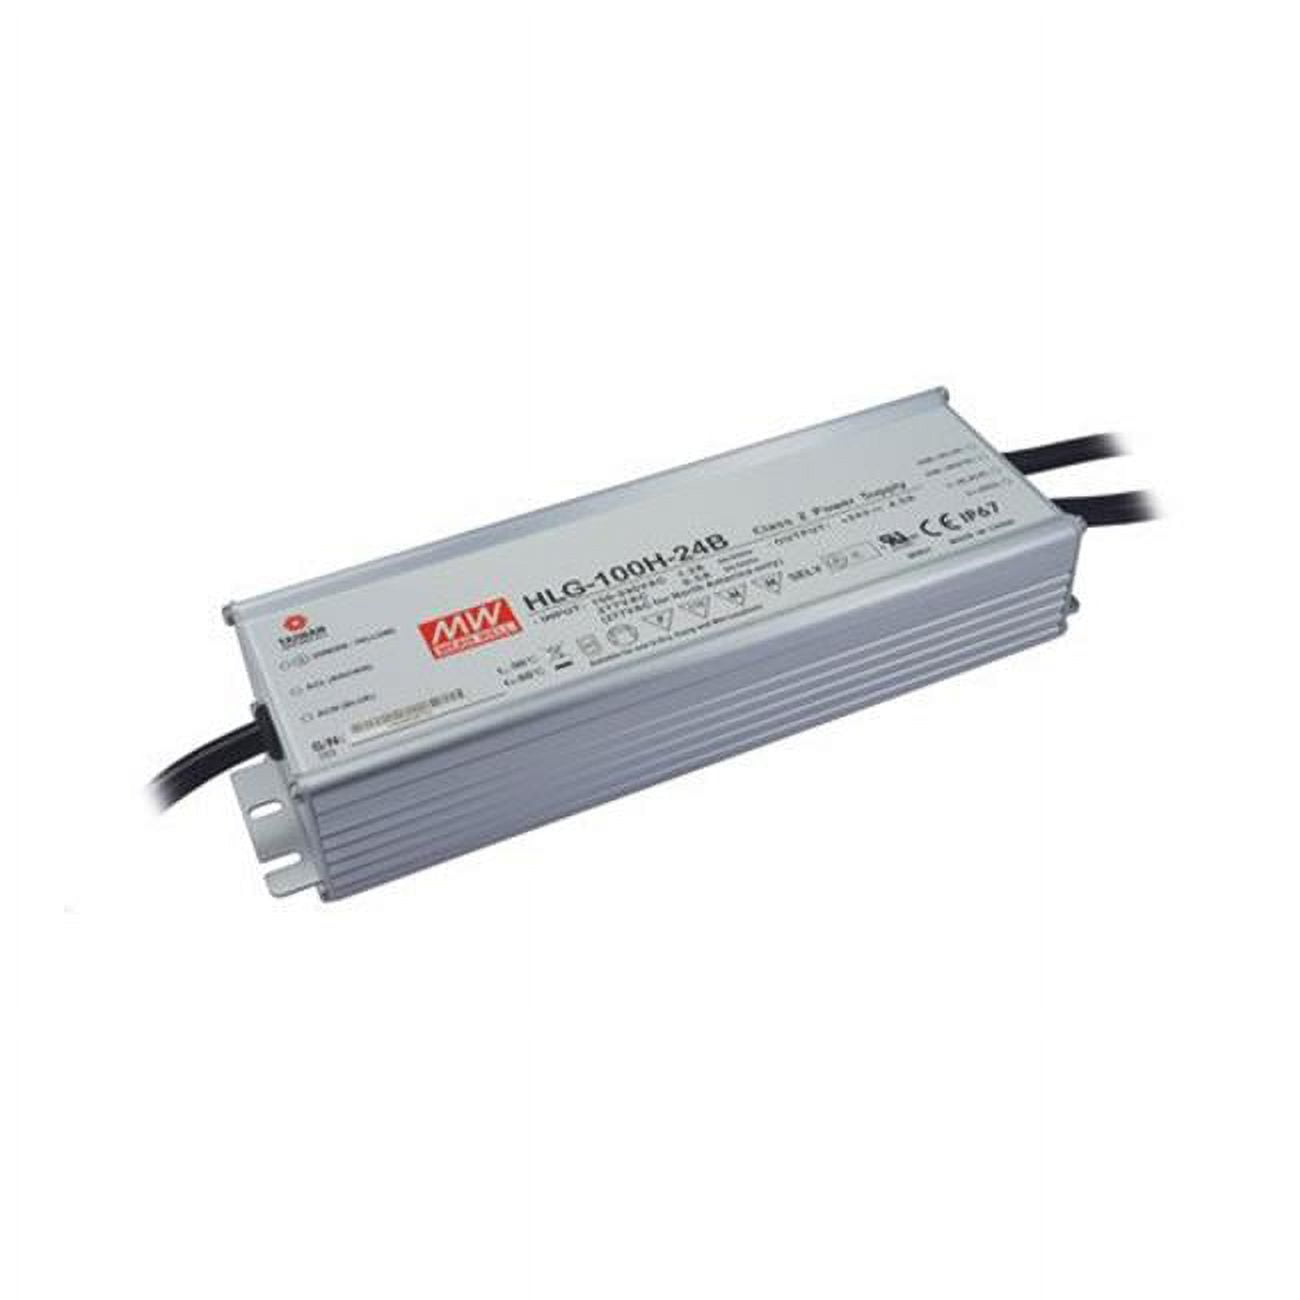 Ccv-dr100-24 100w 24v Dimmable Driver